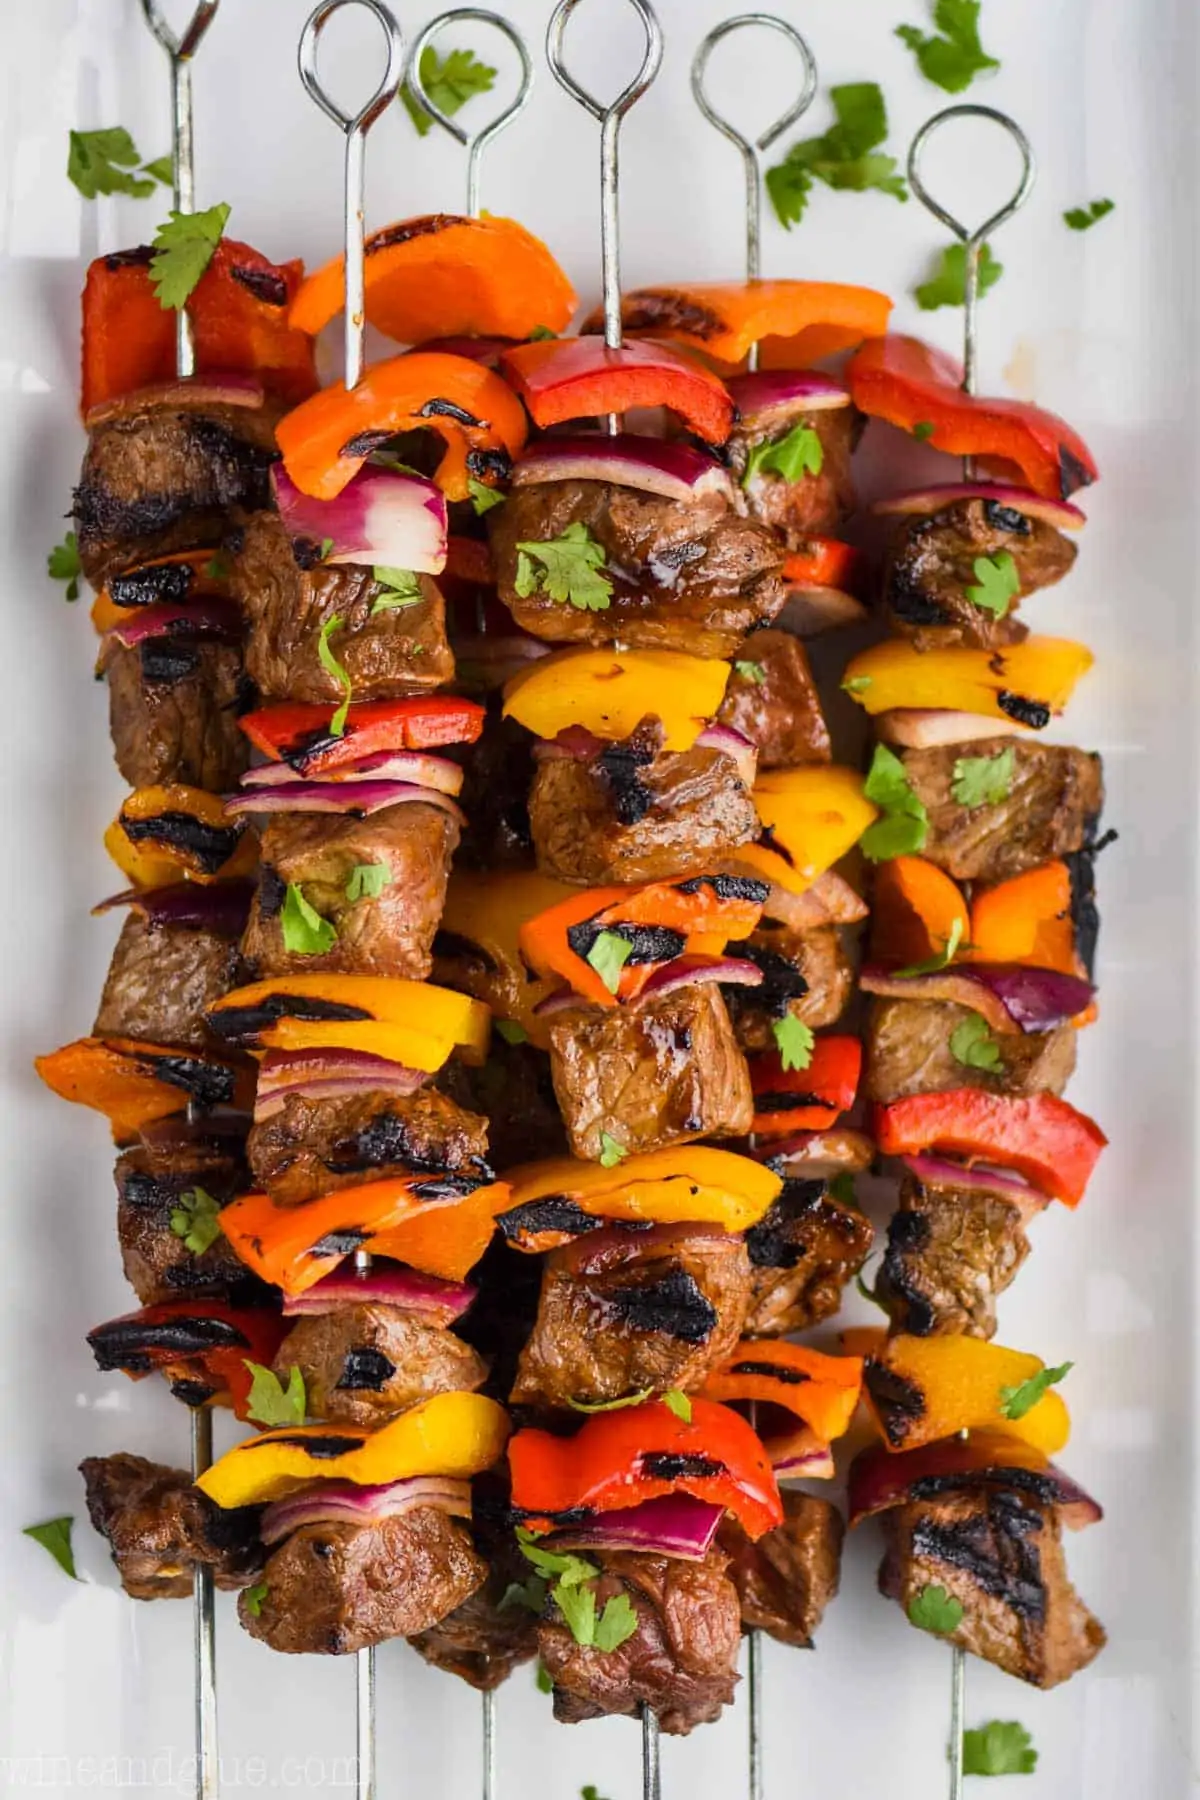 Grilled beef and vegetable skewers garnished with fresh herbs on a white platter.